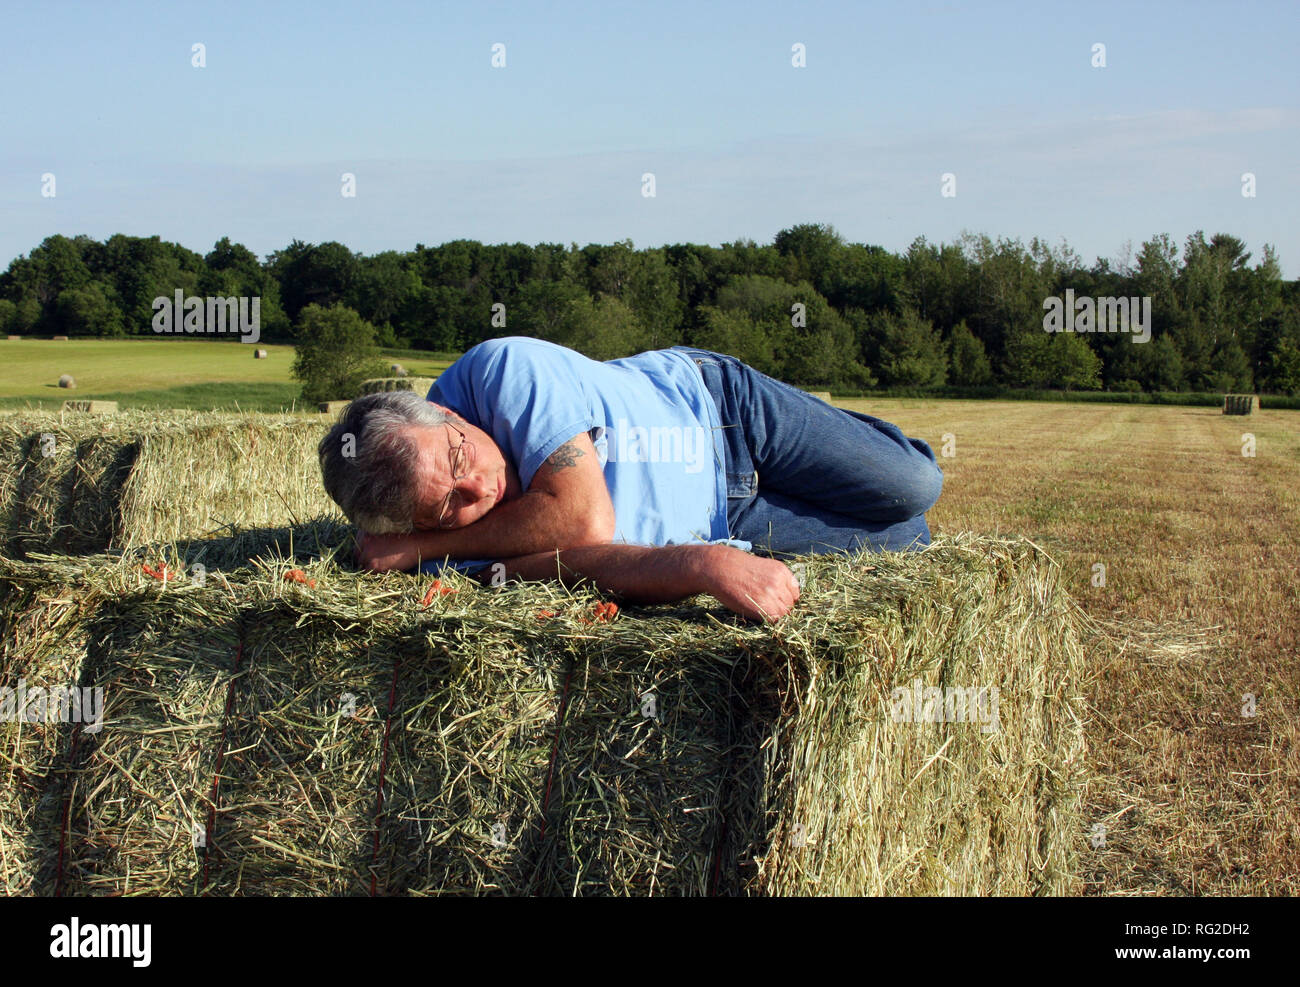 Man sleeping on a hay bale with the field and sky in the background Stock Photo